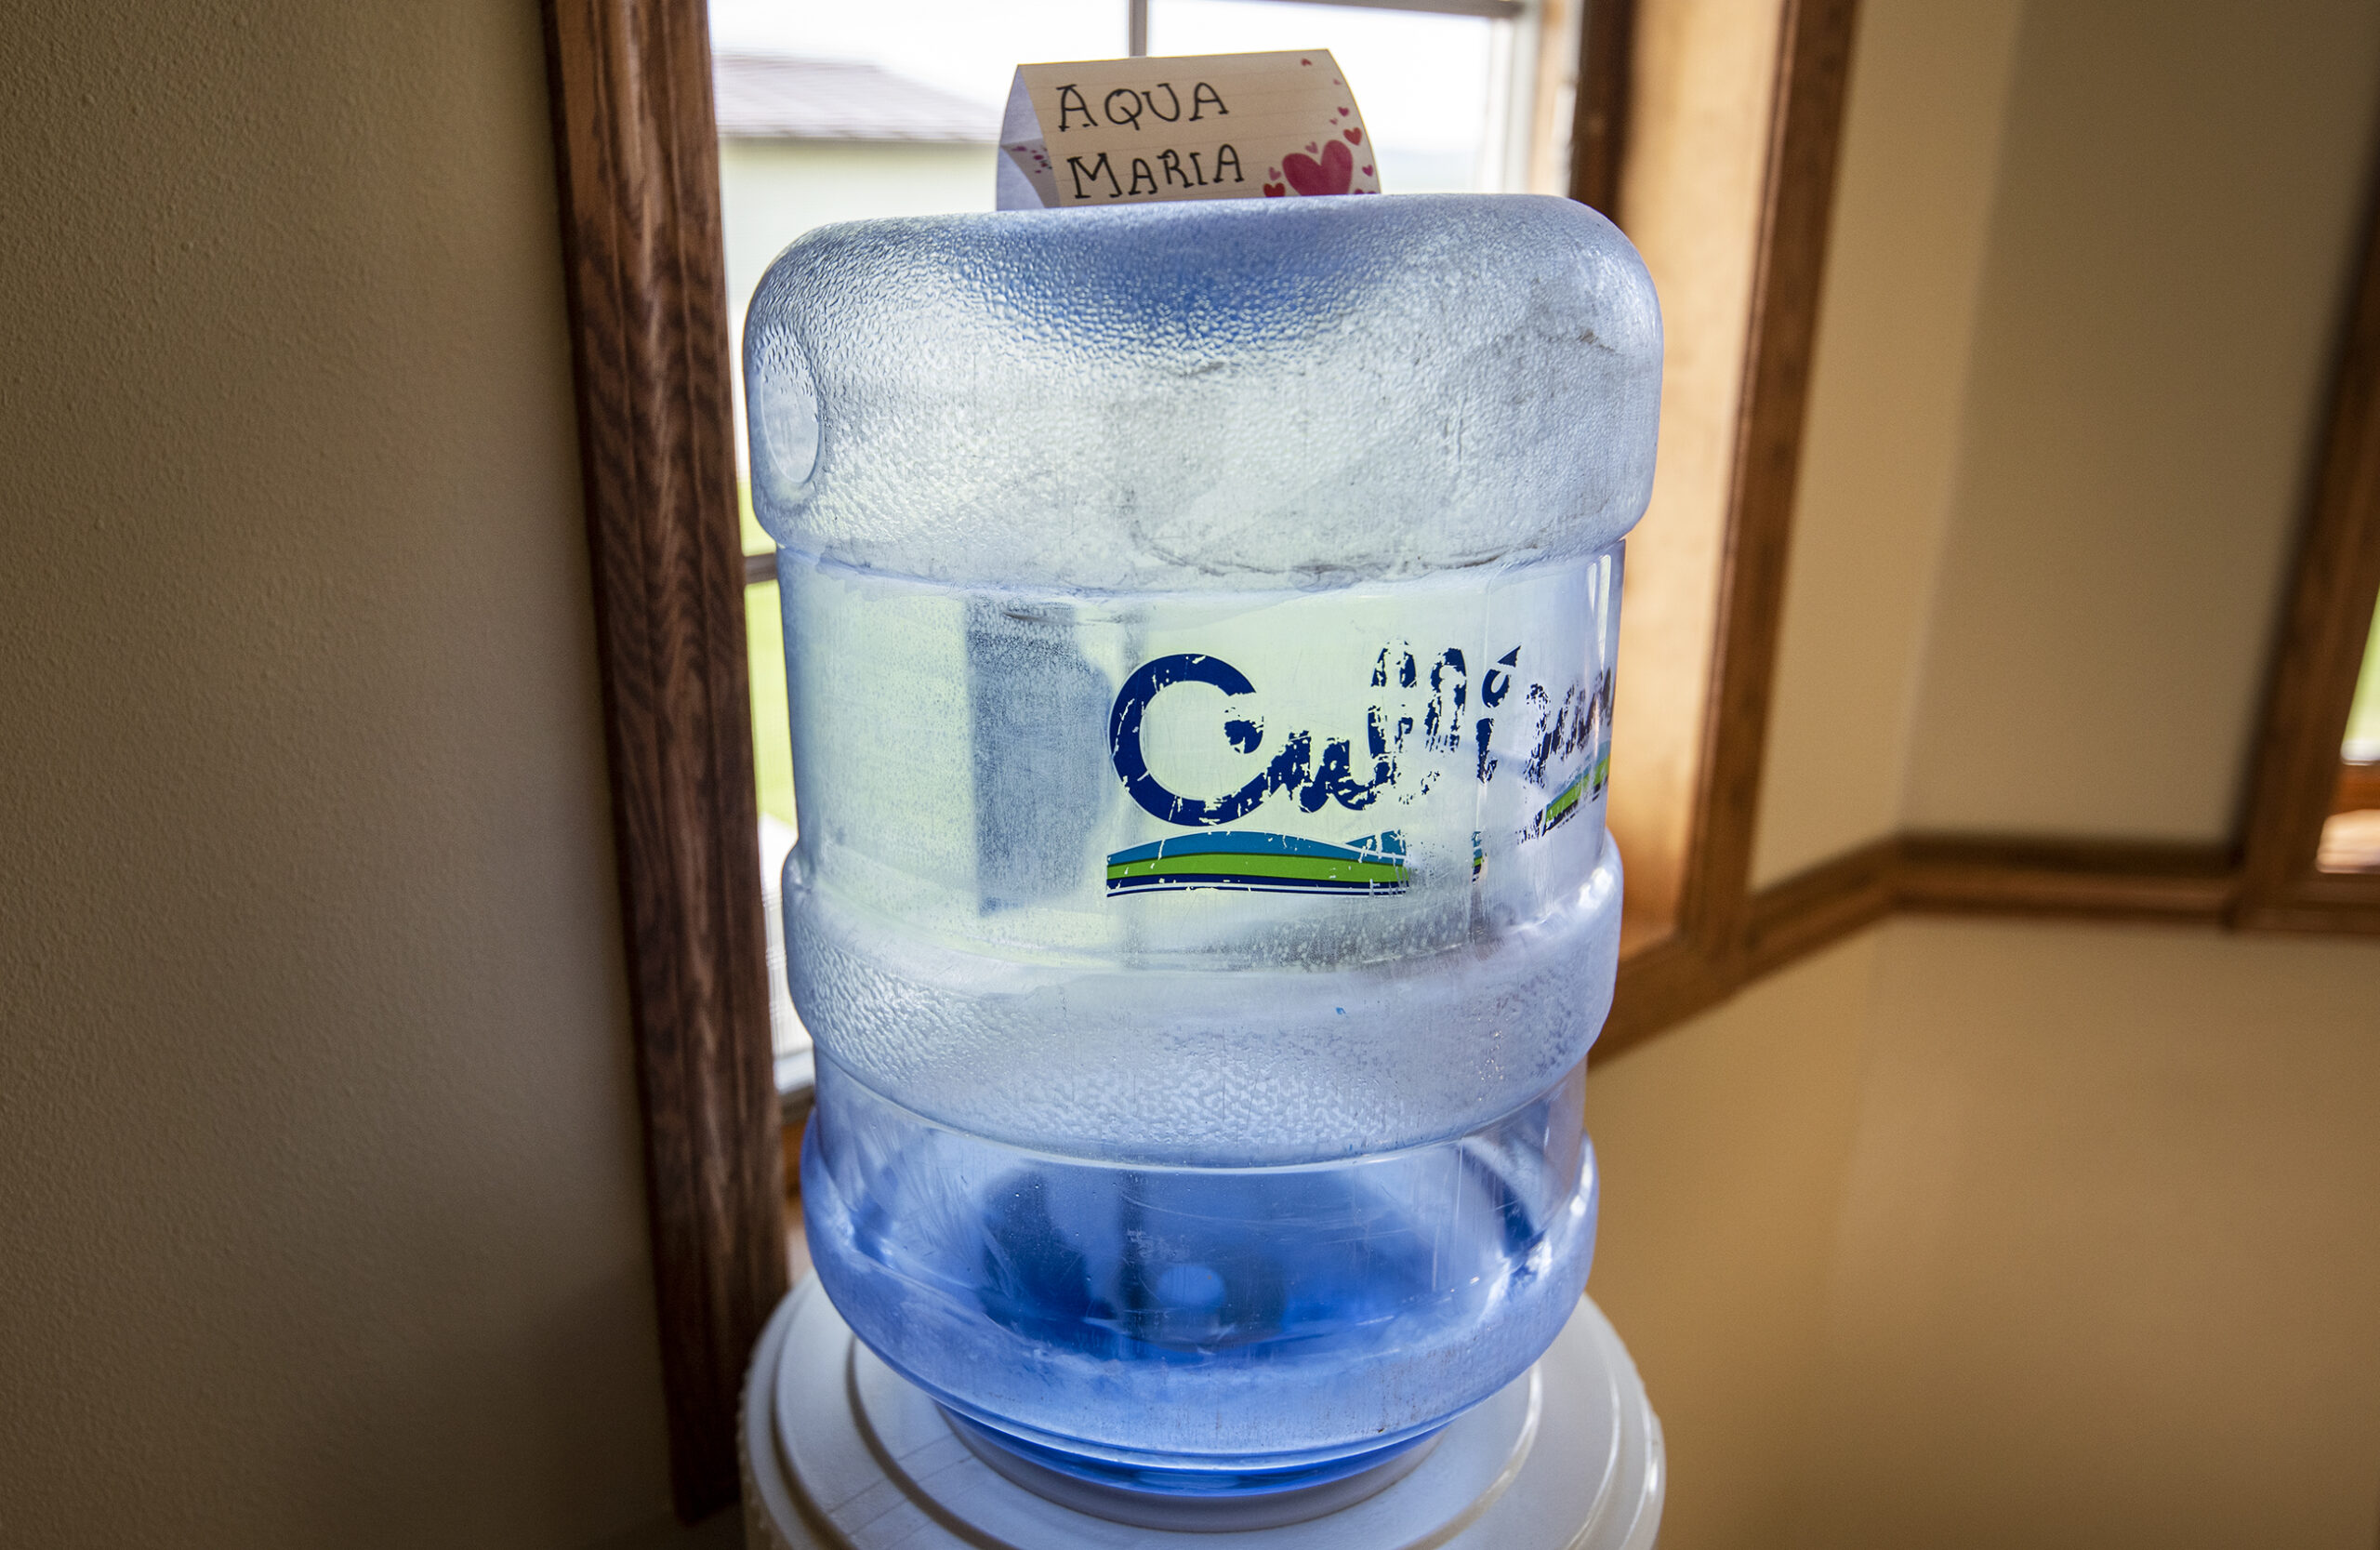 A Culligan jug has a homemade sign that says 